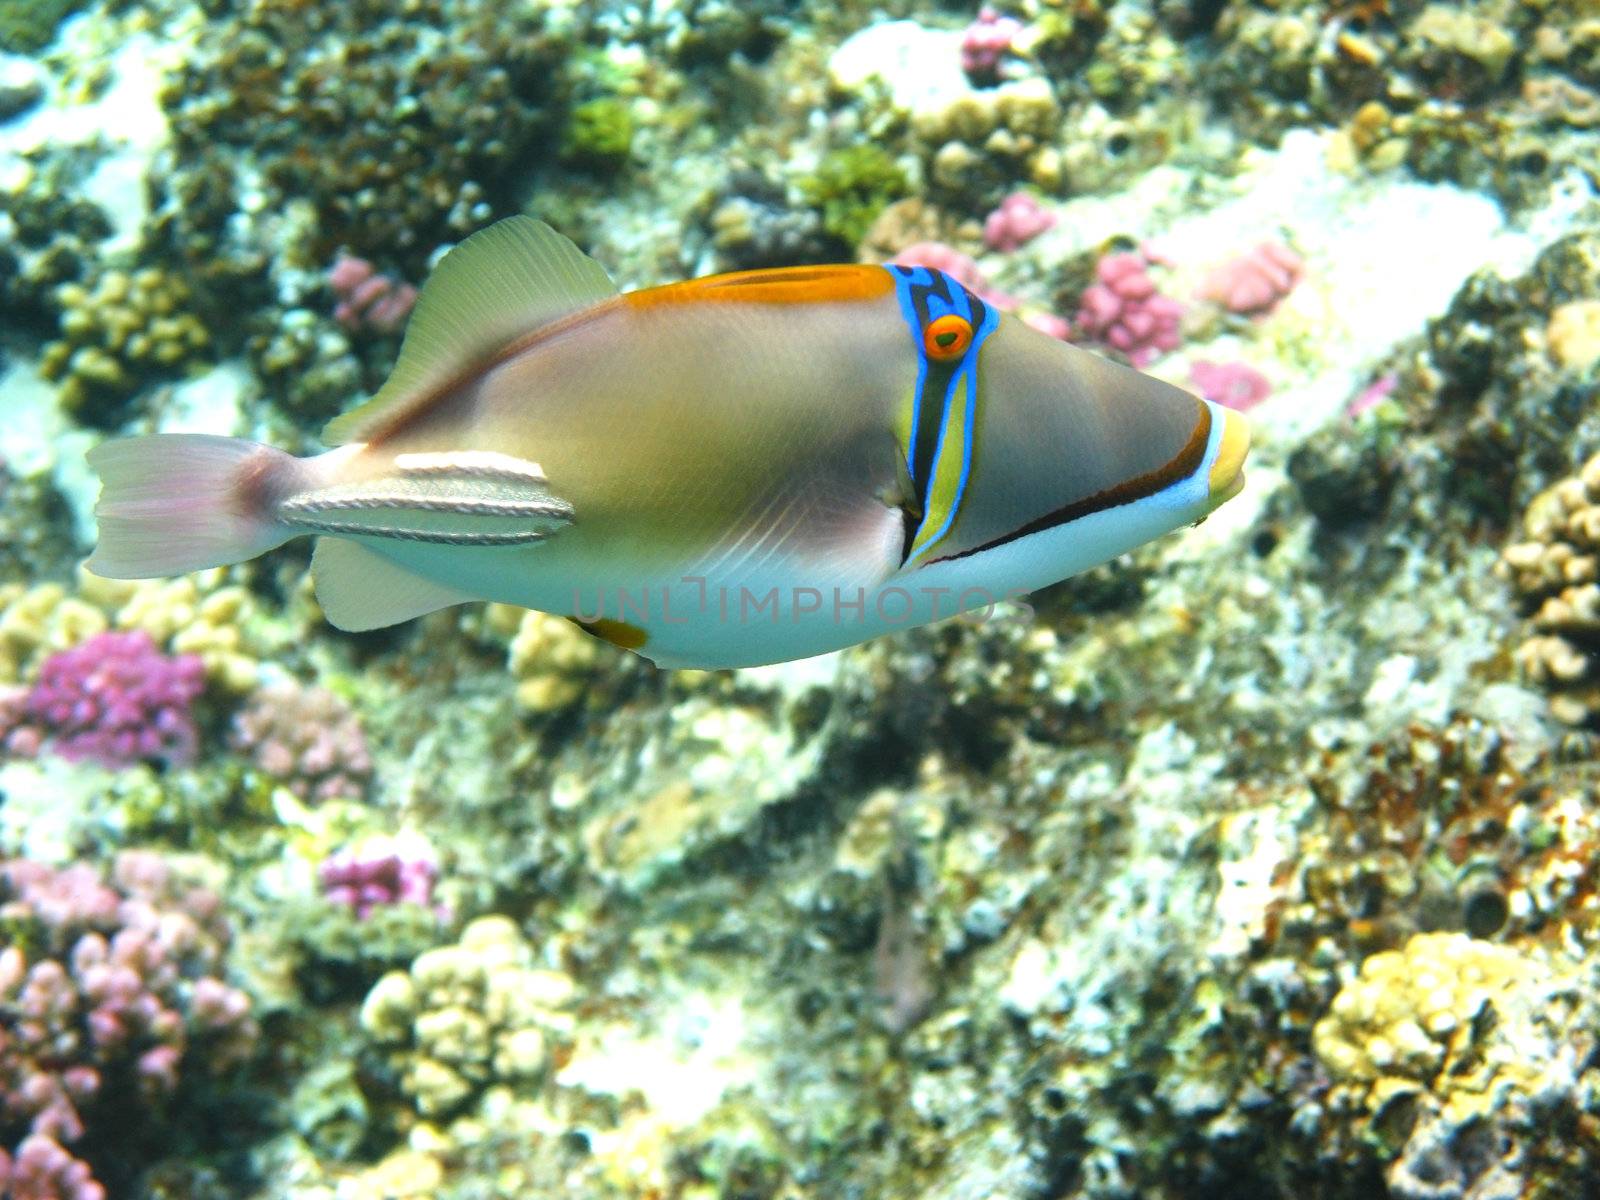 Picasso trigger fish by vintrom